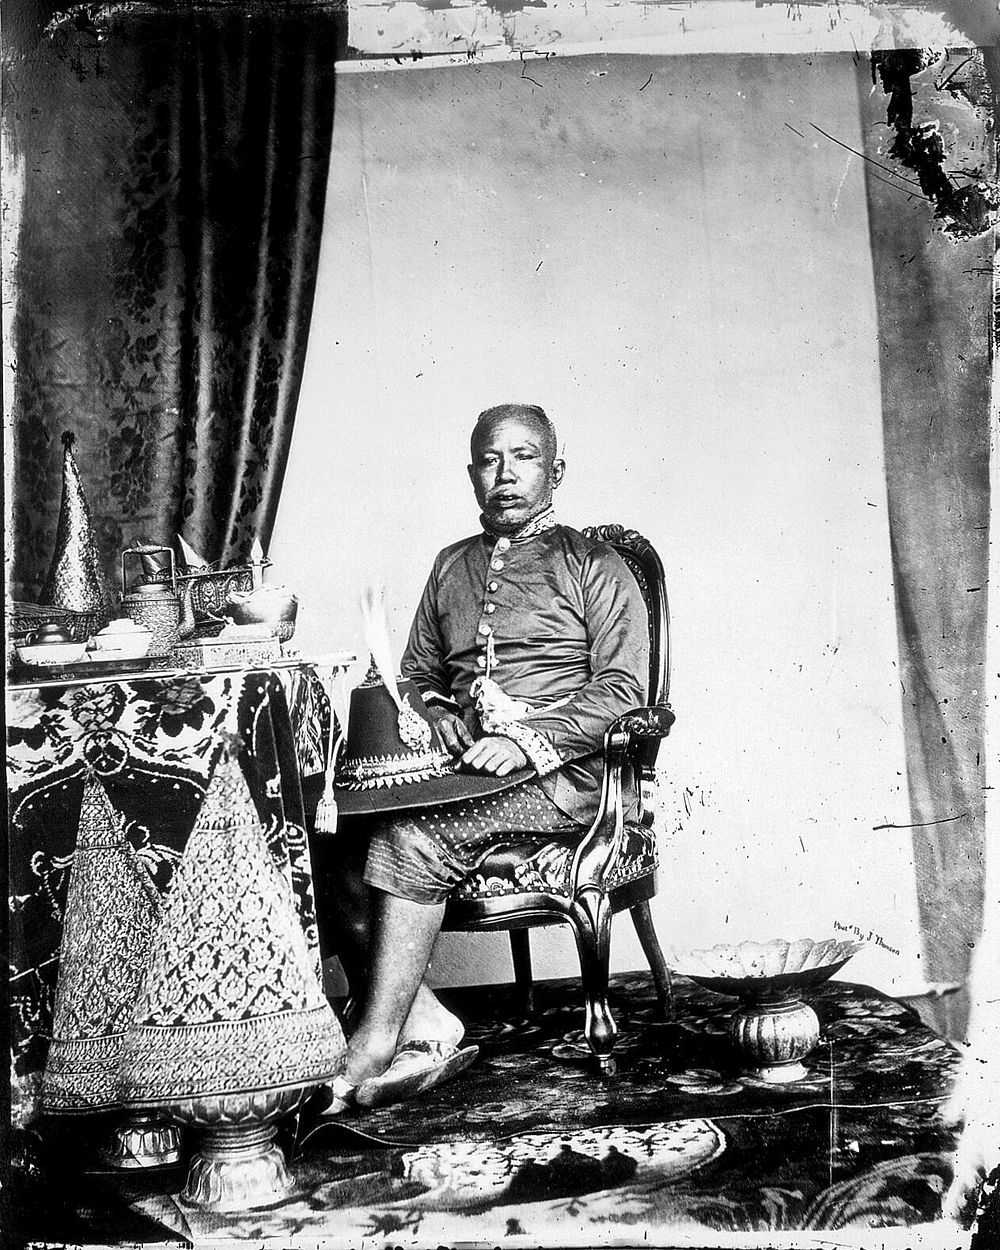 Siam [Thailand]. Photograph, 1981, from a negative by John Thomson, 1866.